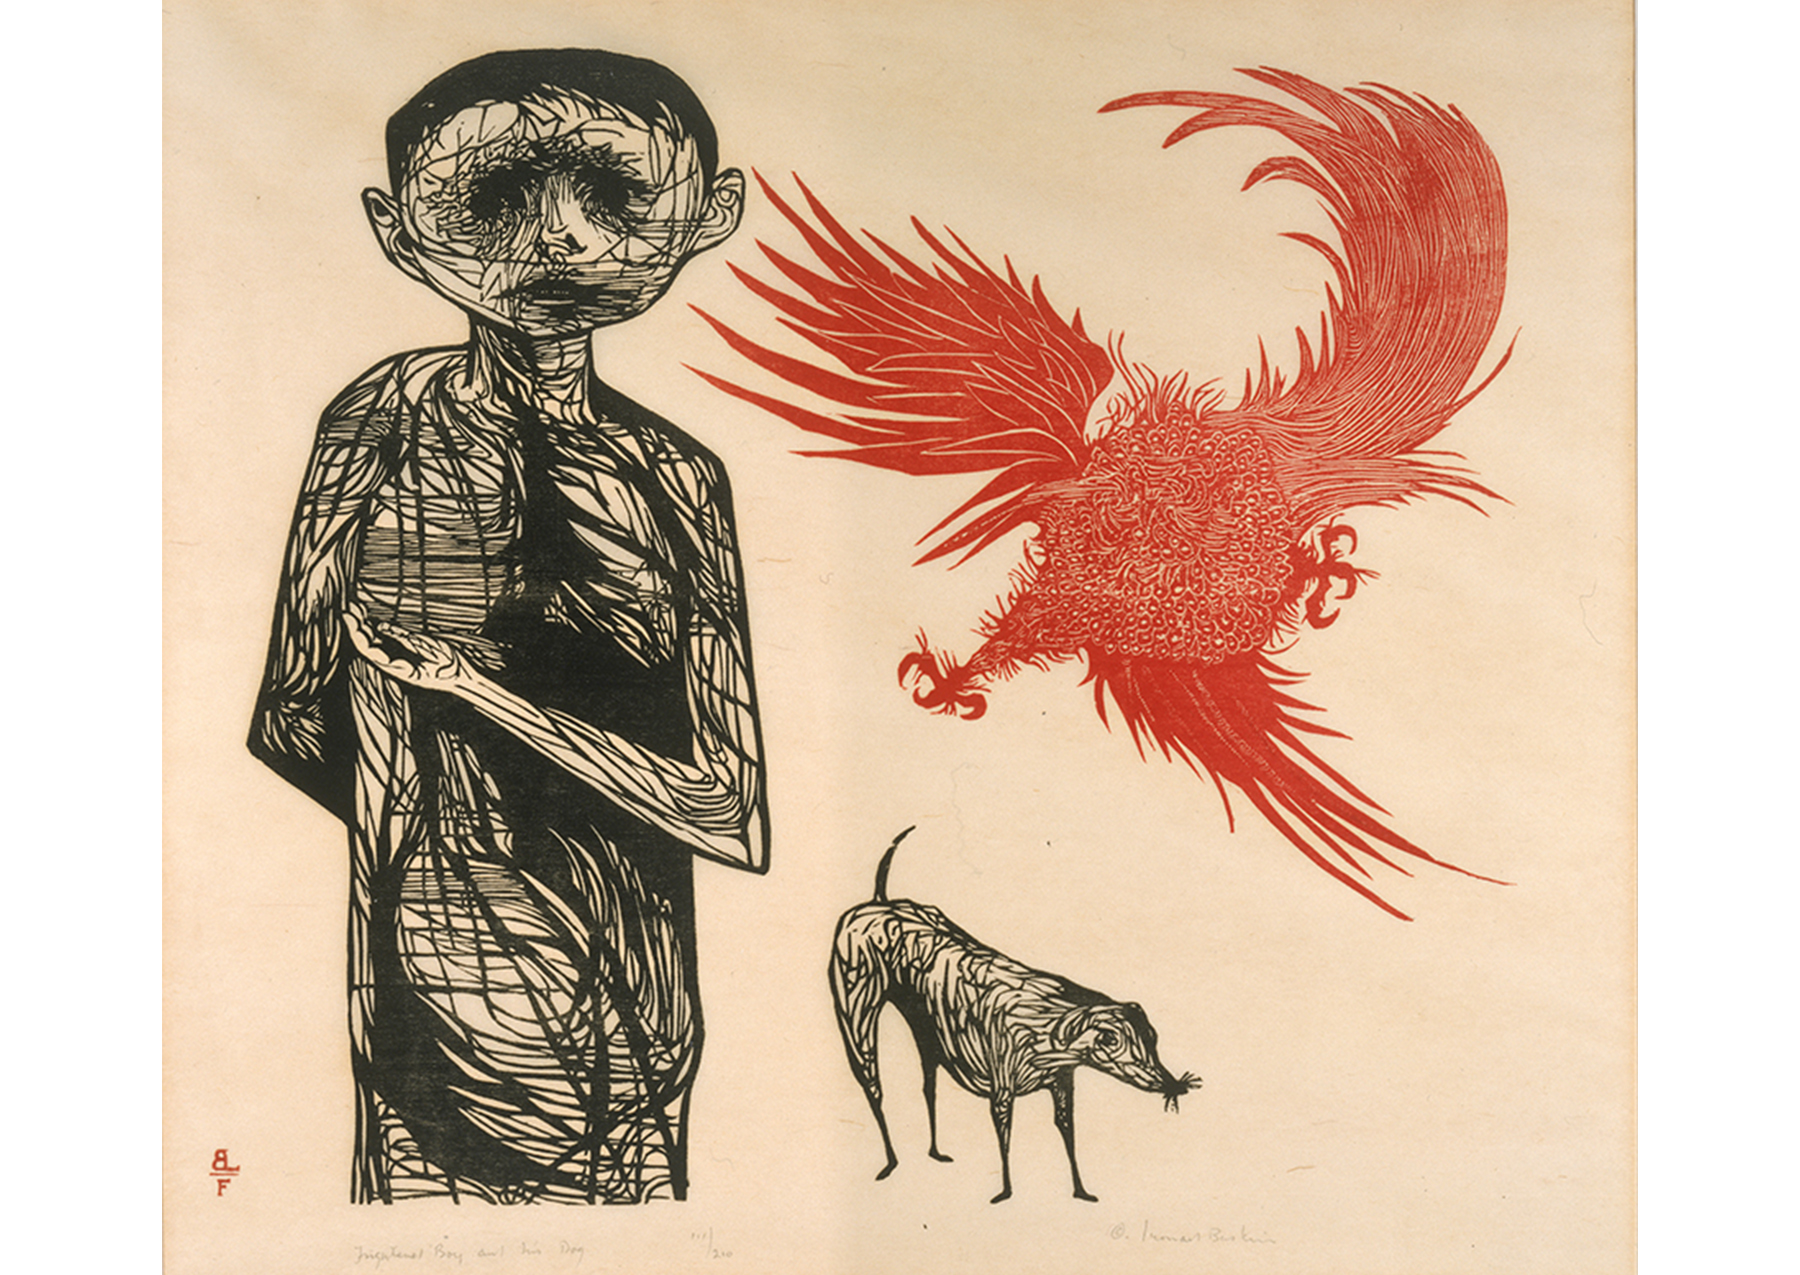 boy drawn in black and white, small dog next to him, large red bird flying in top right corner